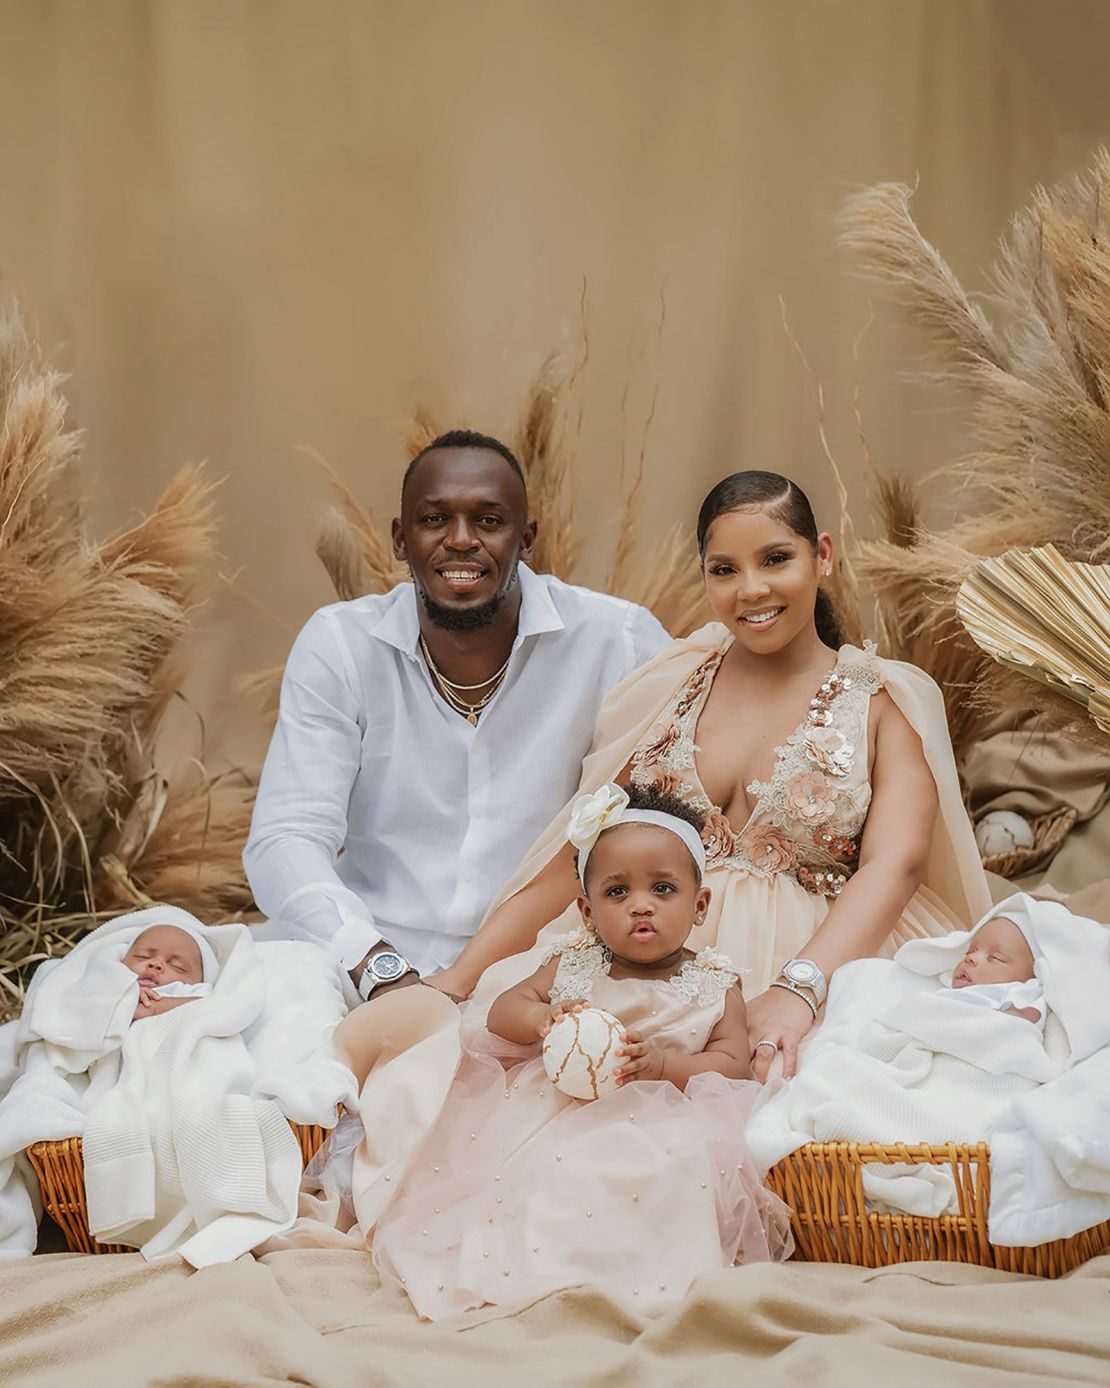 Usain Bolt posted a photo of his family on Instagram on Father's Day, sharing the names of his newborn twin sons, Thunder and Saint Leo.